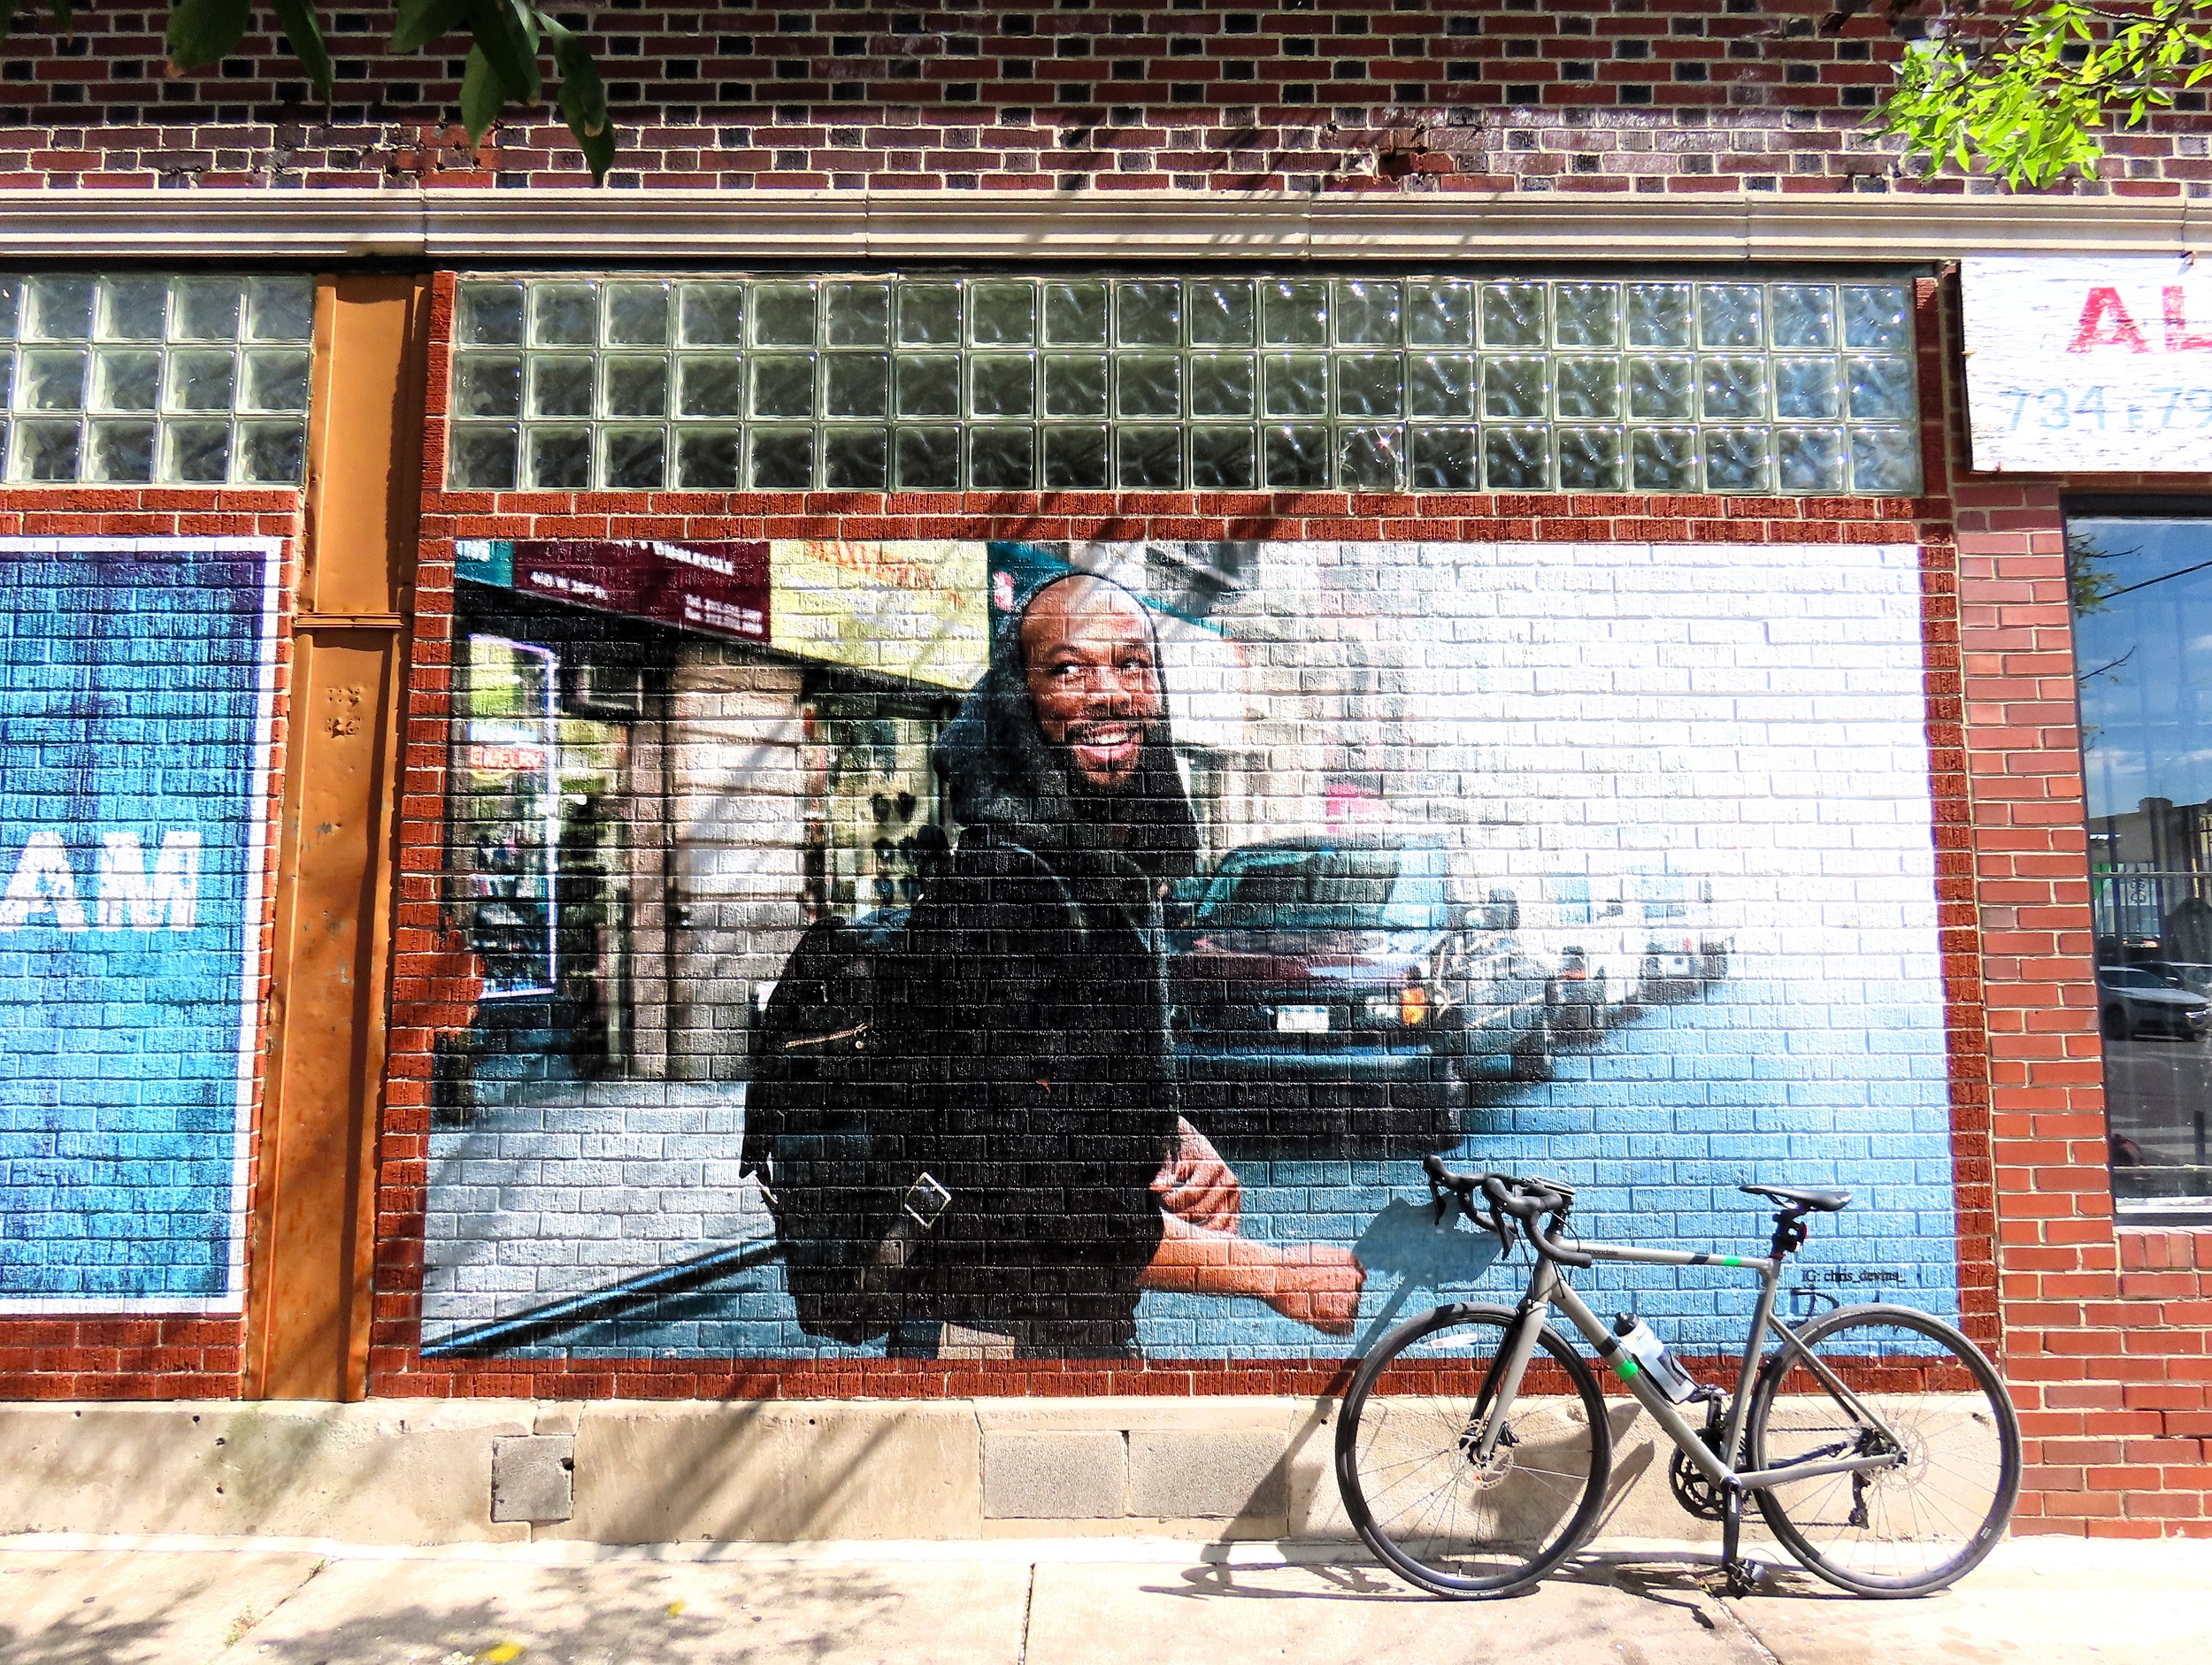 A tour bike leaning on a photorealistic mural of a smiling young Black man in a black hoody walking on the street.